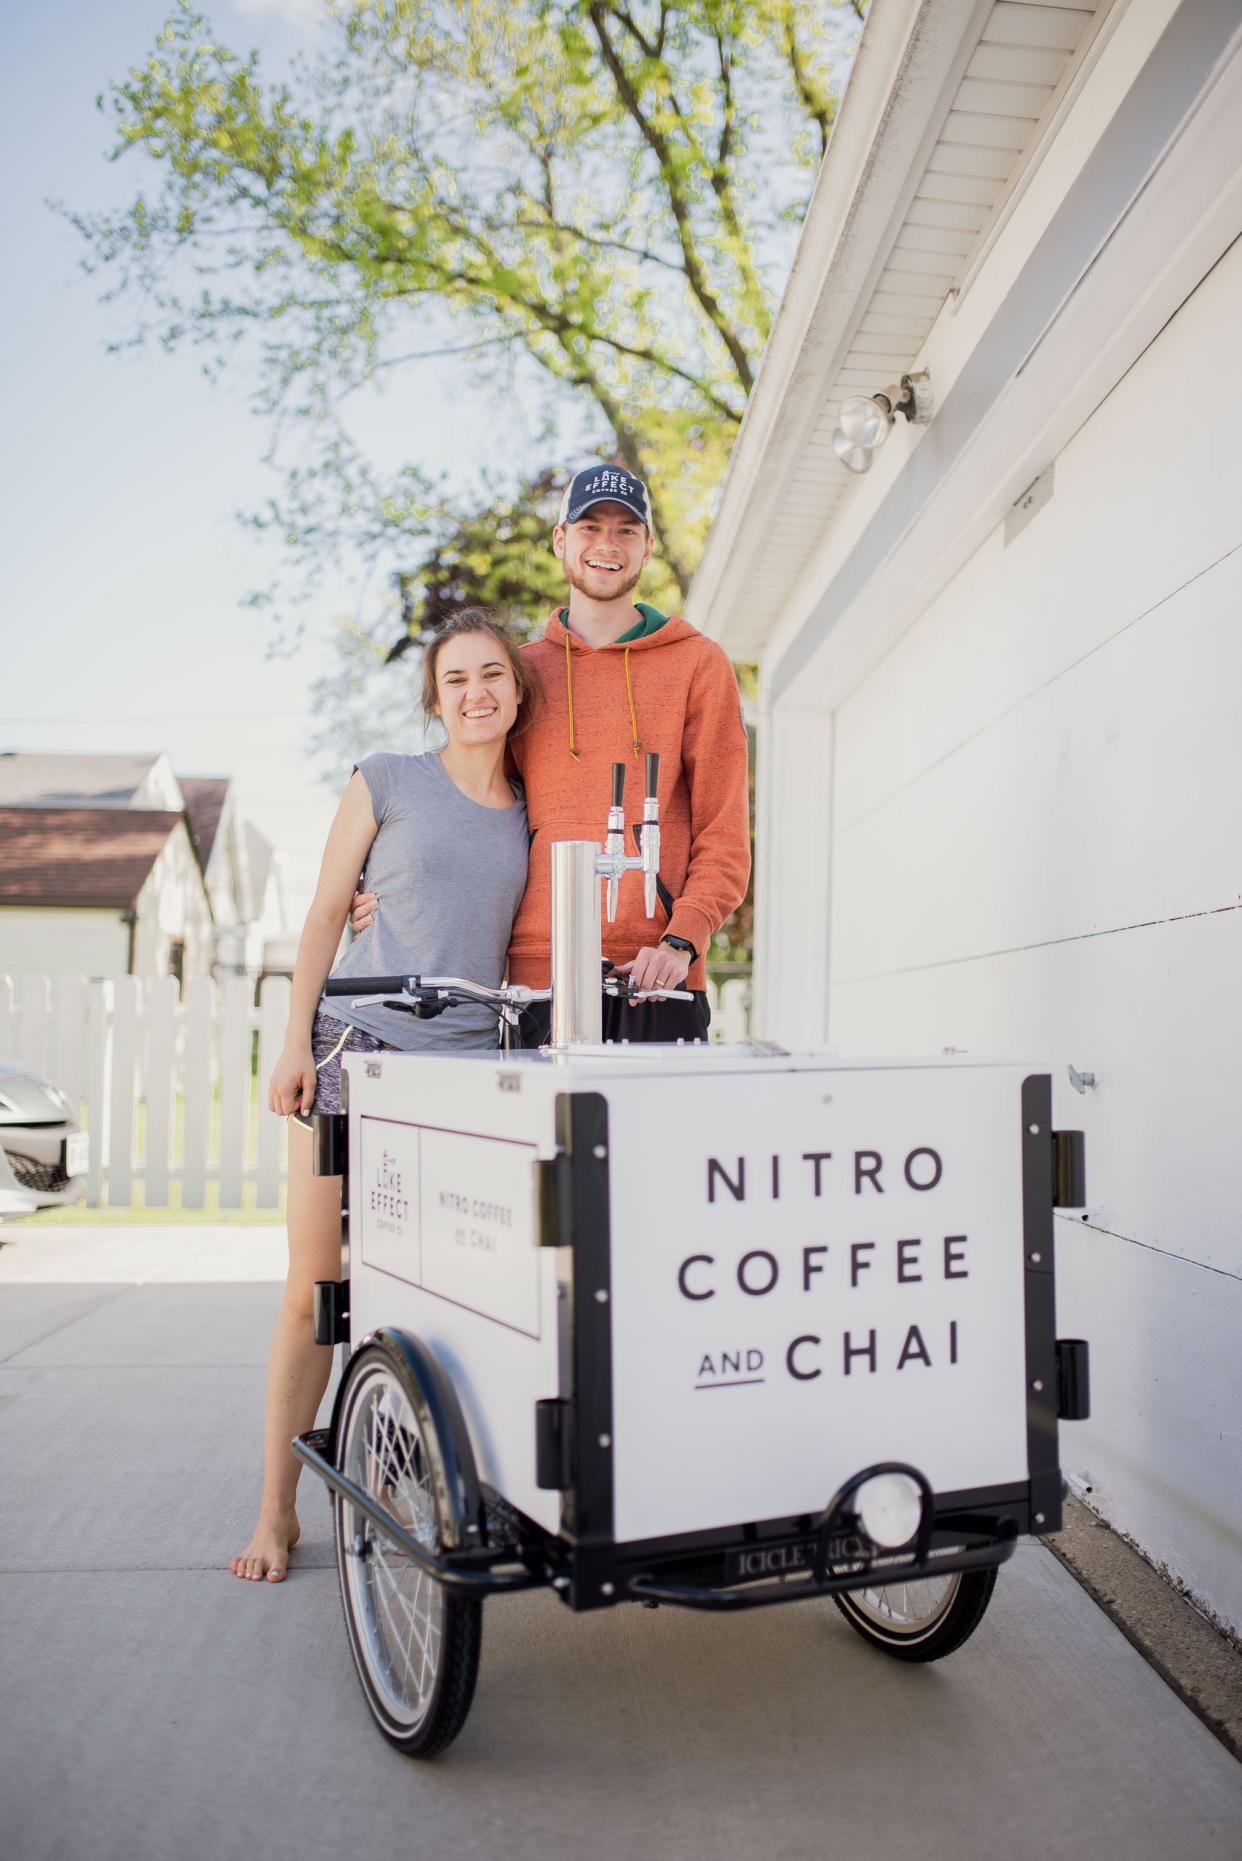 Collin Benz and his wife Samantha are opening their first brick-and-mortar location for Lake Effect Coffee Co. in West Allis in August 2023.